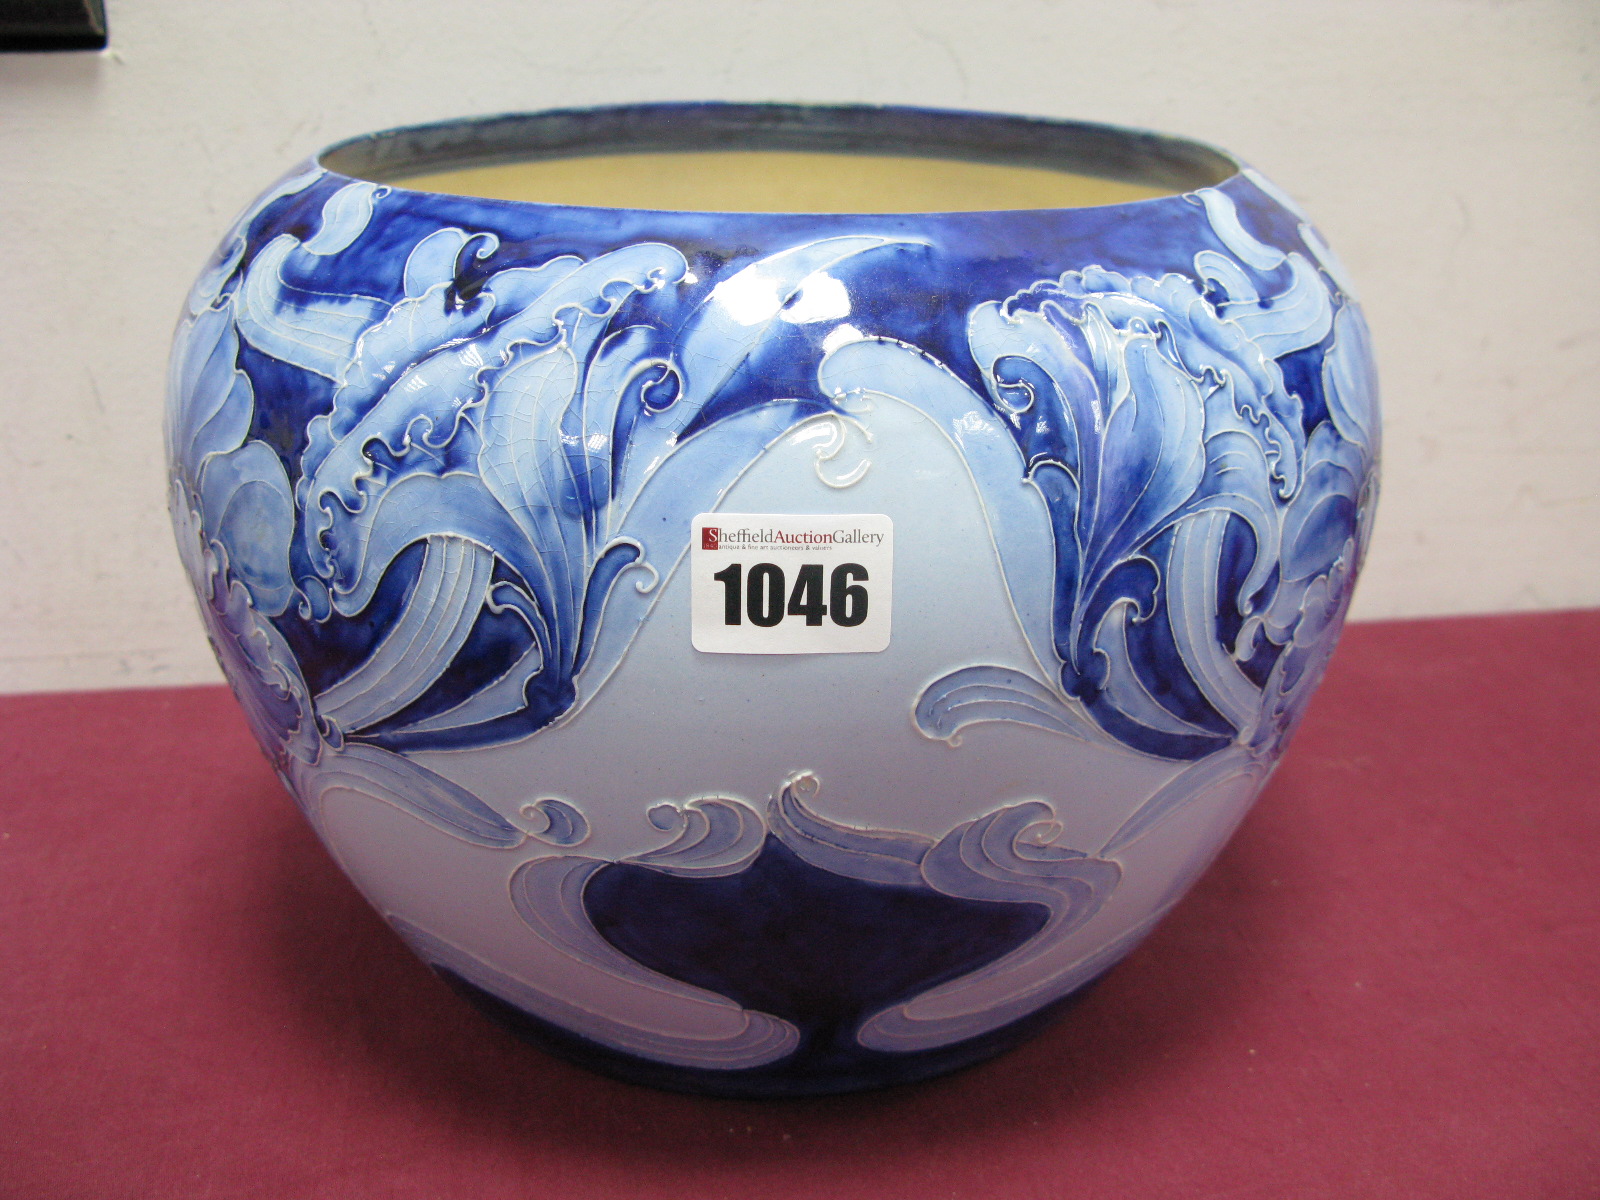 A Macintyre Moorcroft Pottery 'Florian' Ware Jardiniére, decorated in the 'Daffodil' pattern in